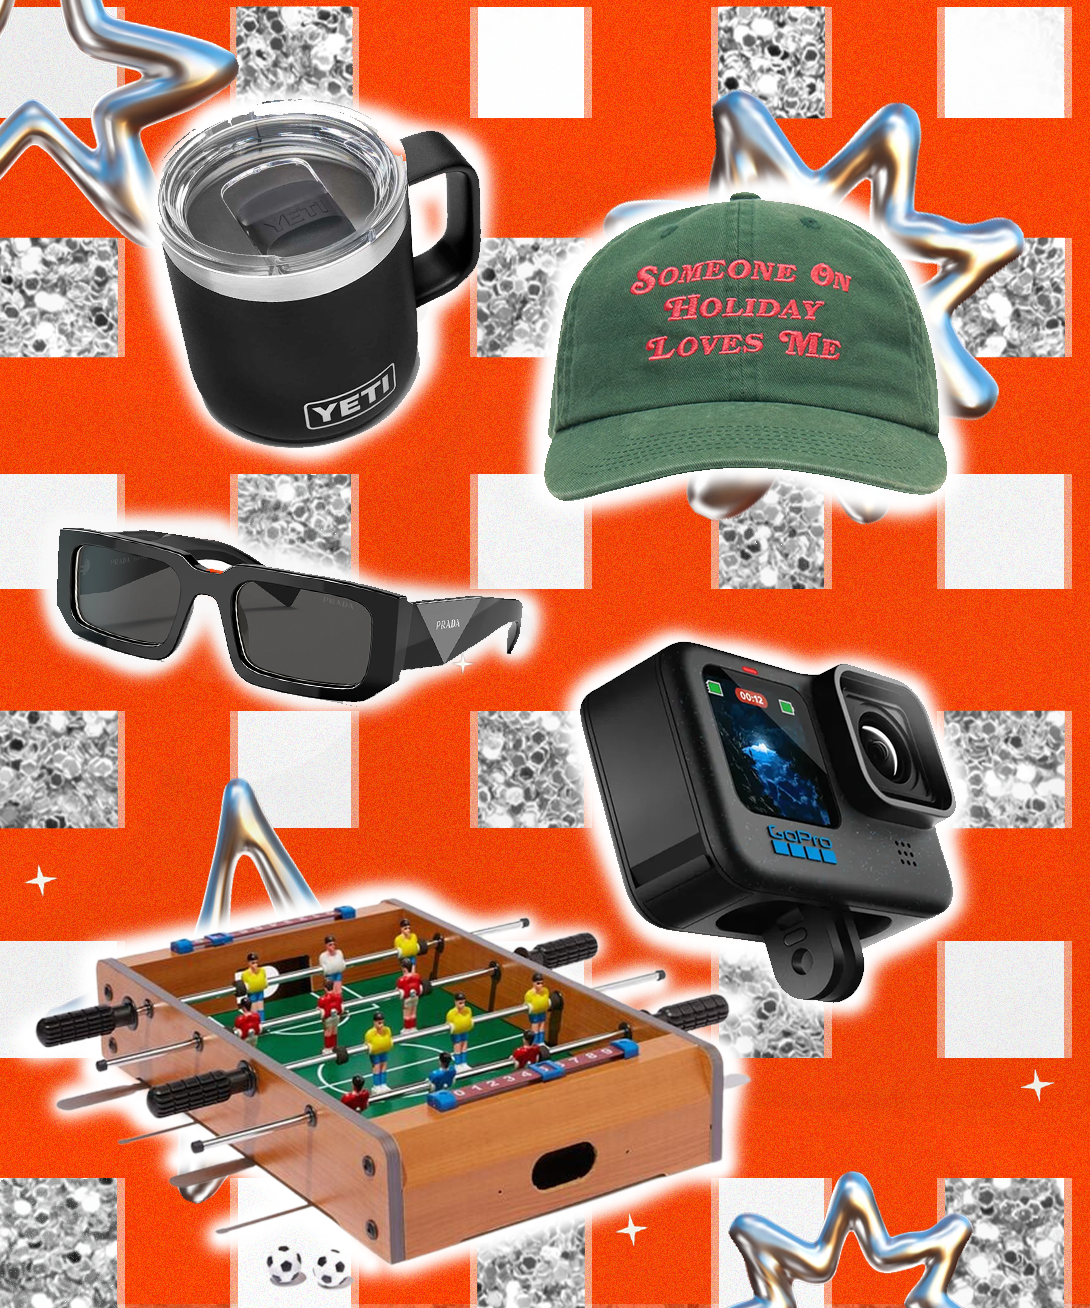 Ten Best Gifts for Guys (That He'll Use)